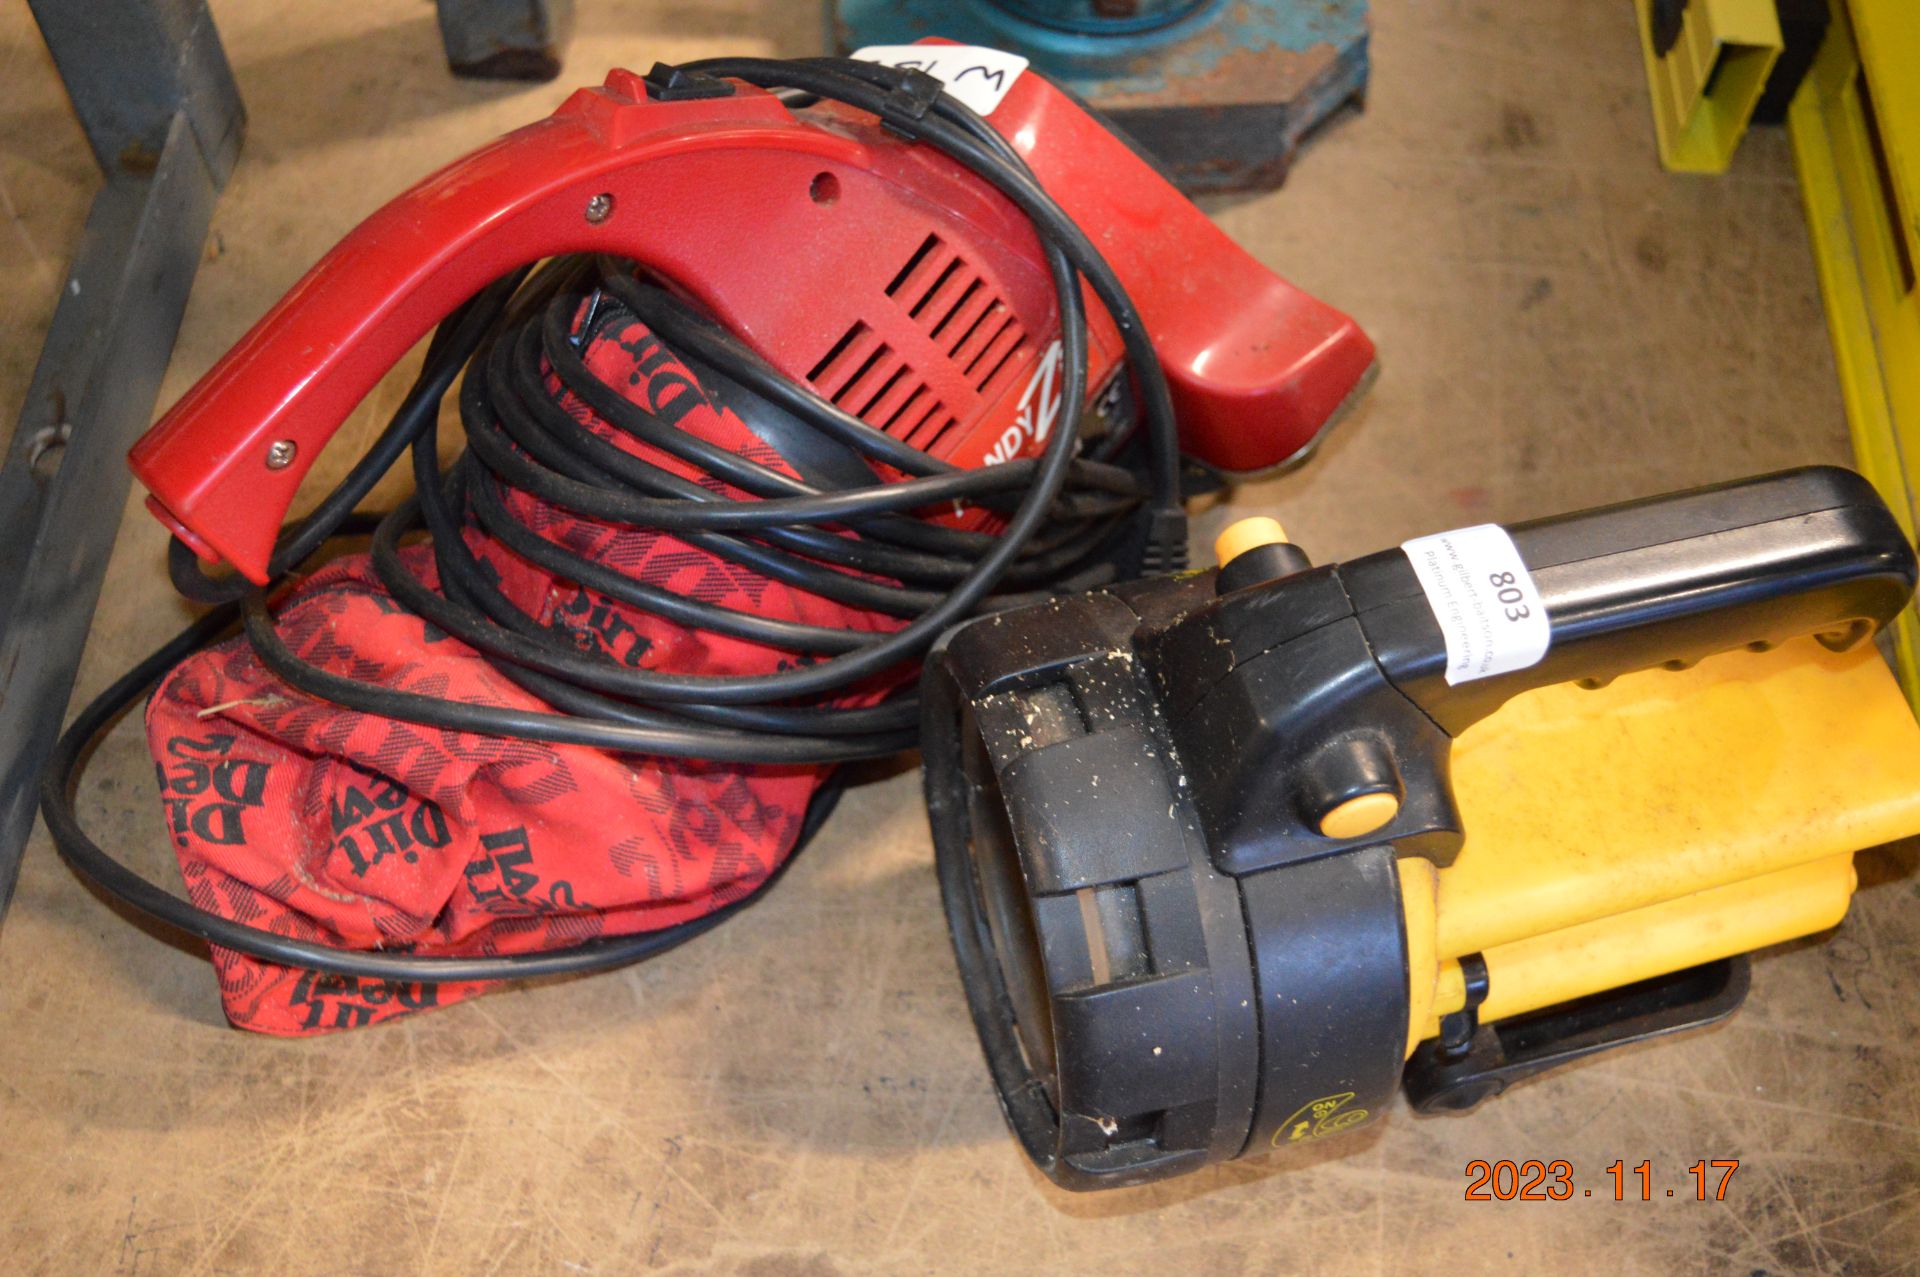 Power Devil Handy Zip Vacuum Cleaner and a Torch